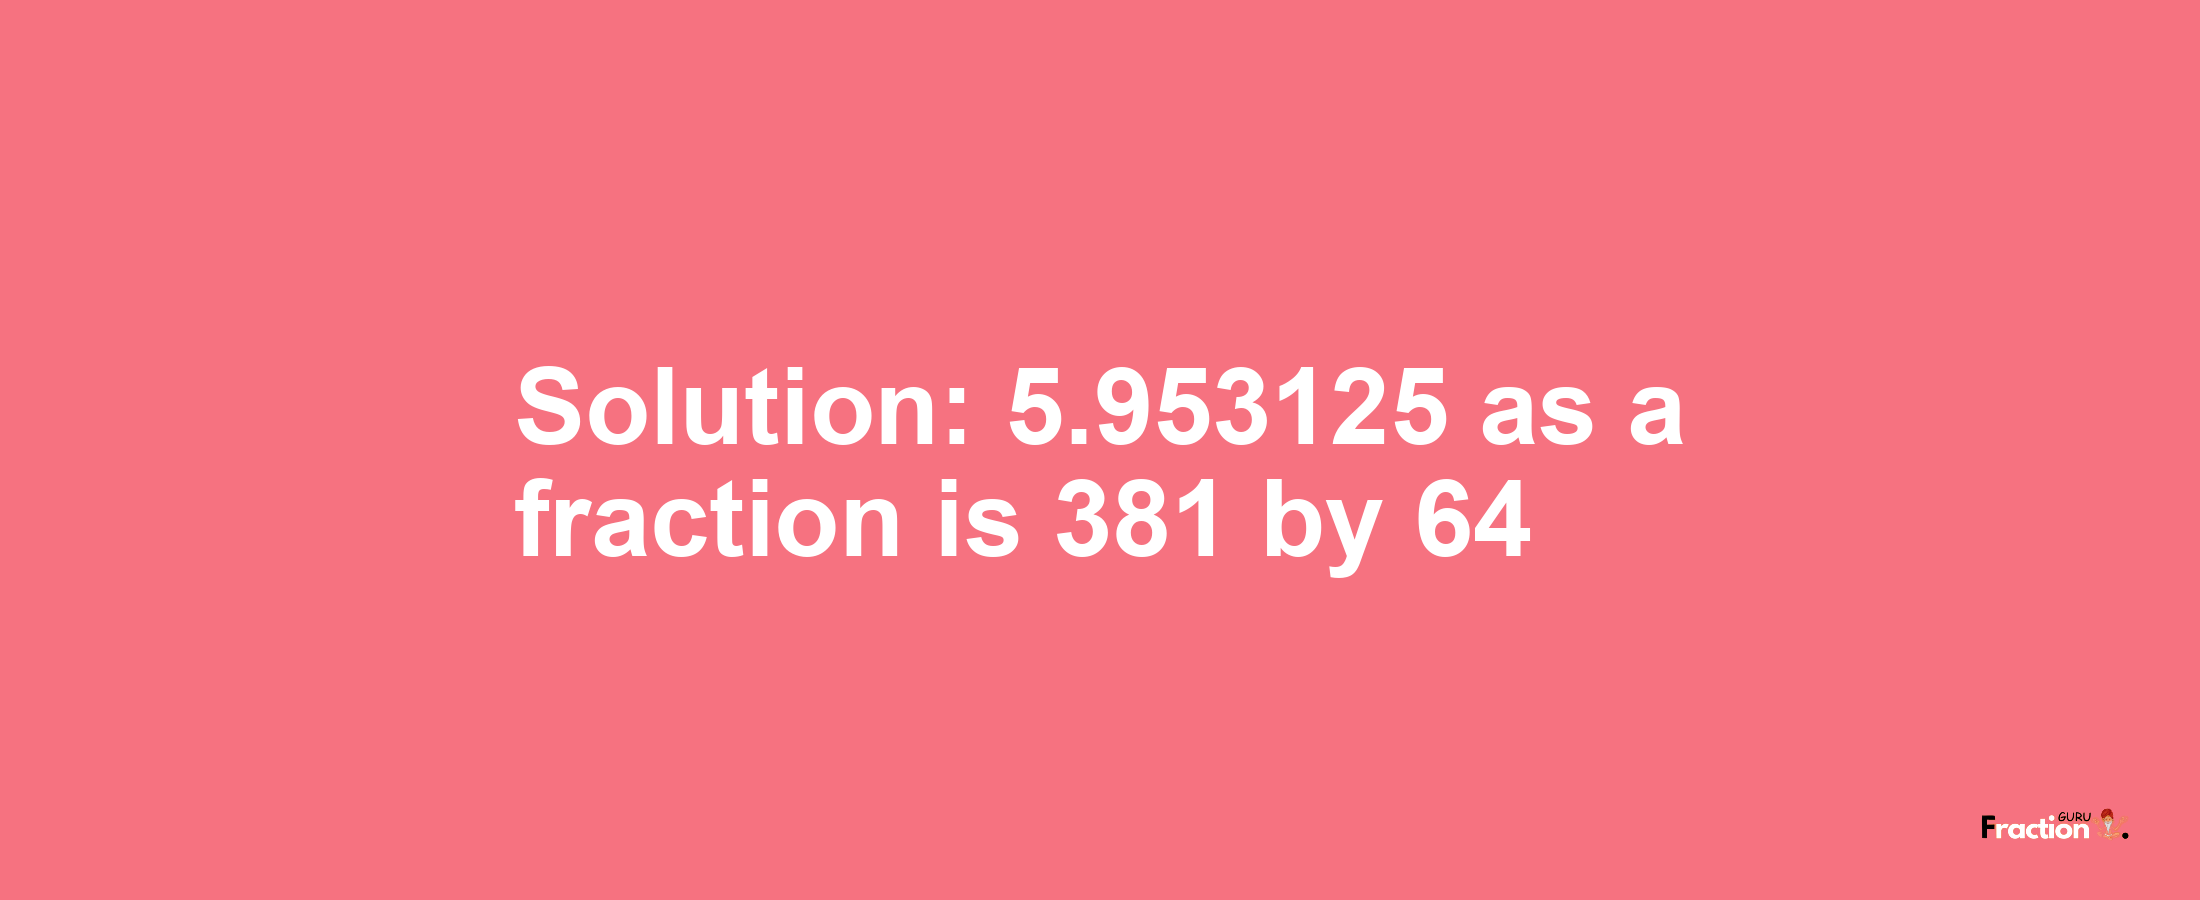 Solution:5.953125 as a fraction is 381/64